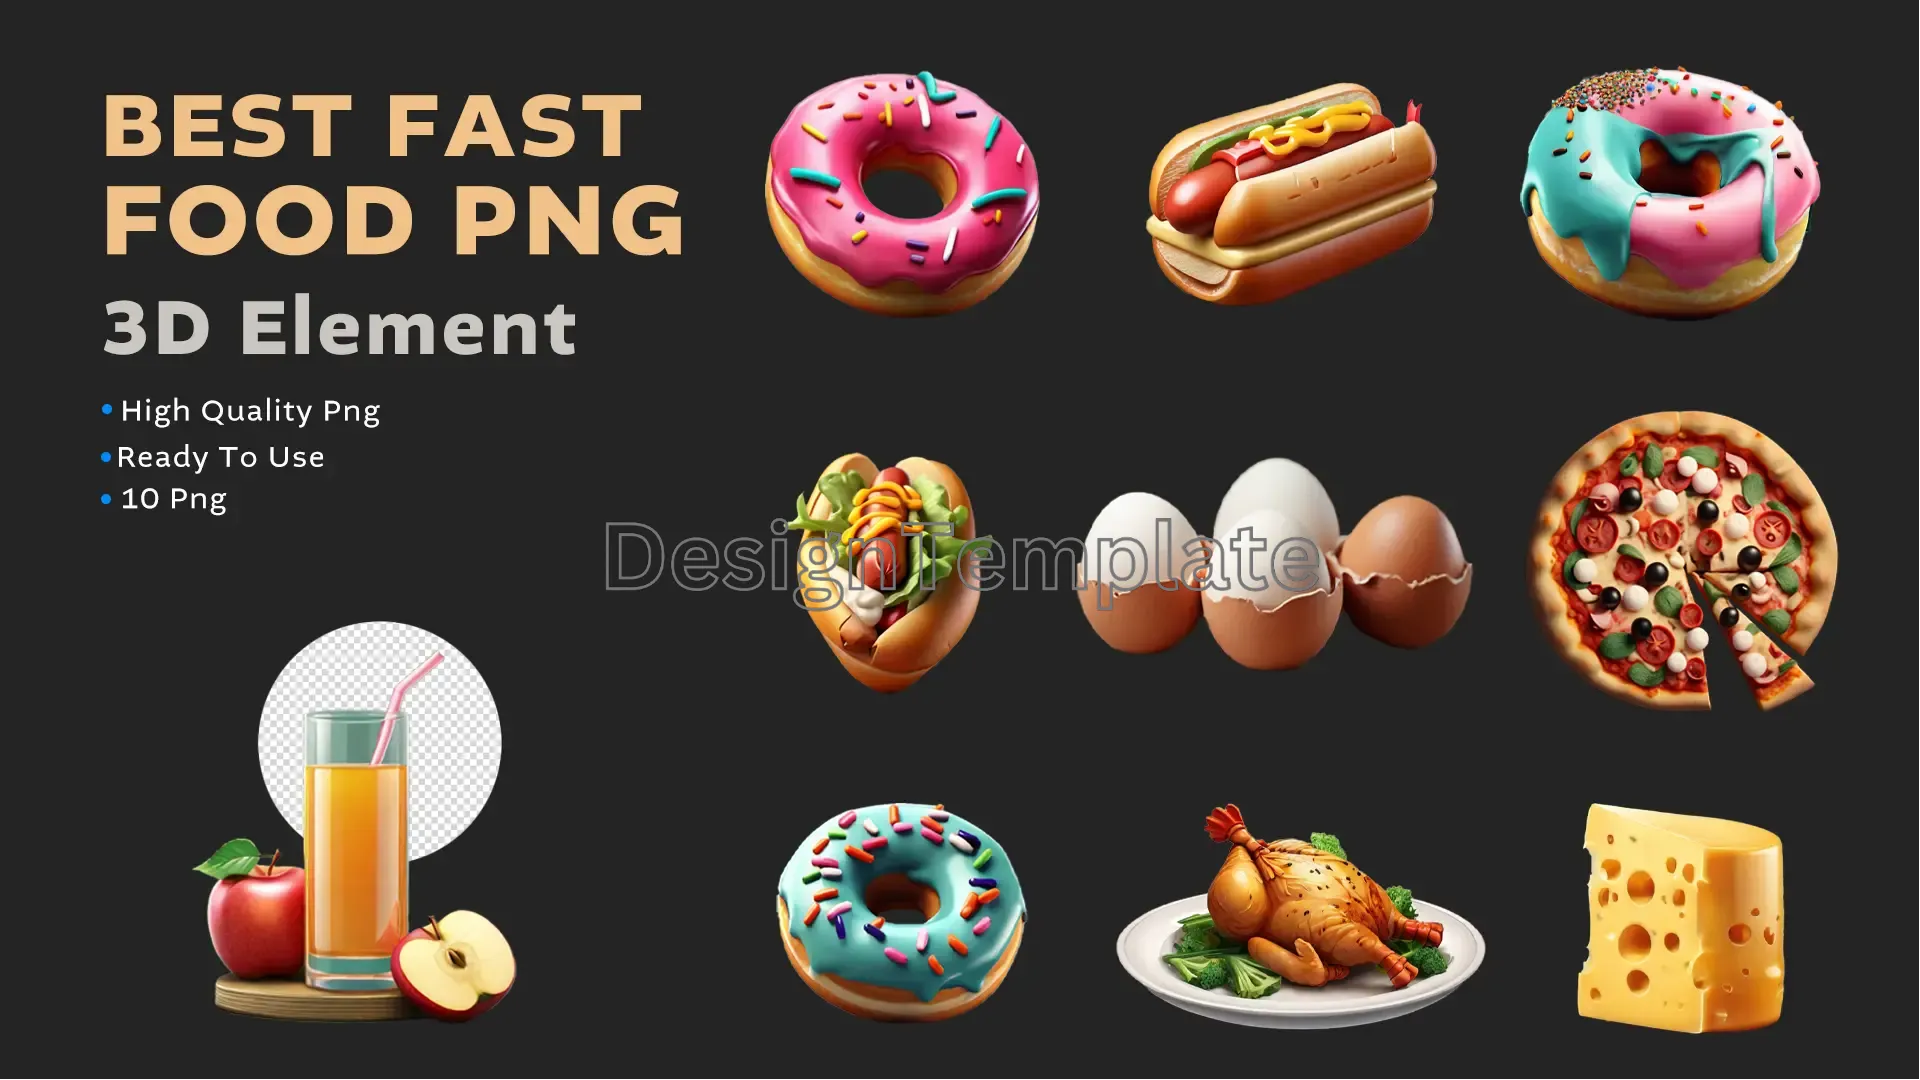 Flavor Frenzy Best Fast Food PNG 3D Elements Pack